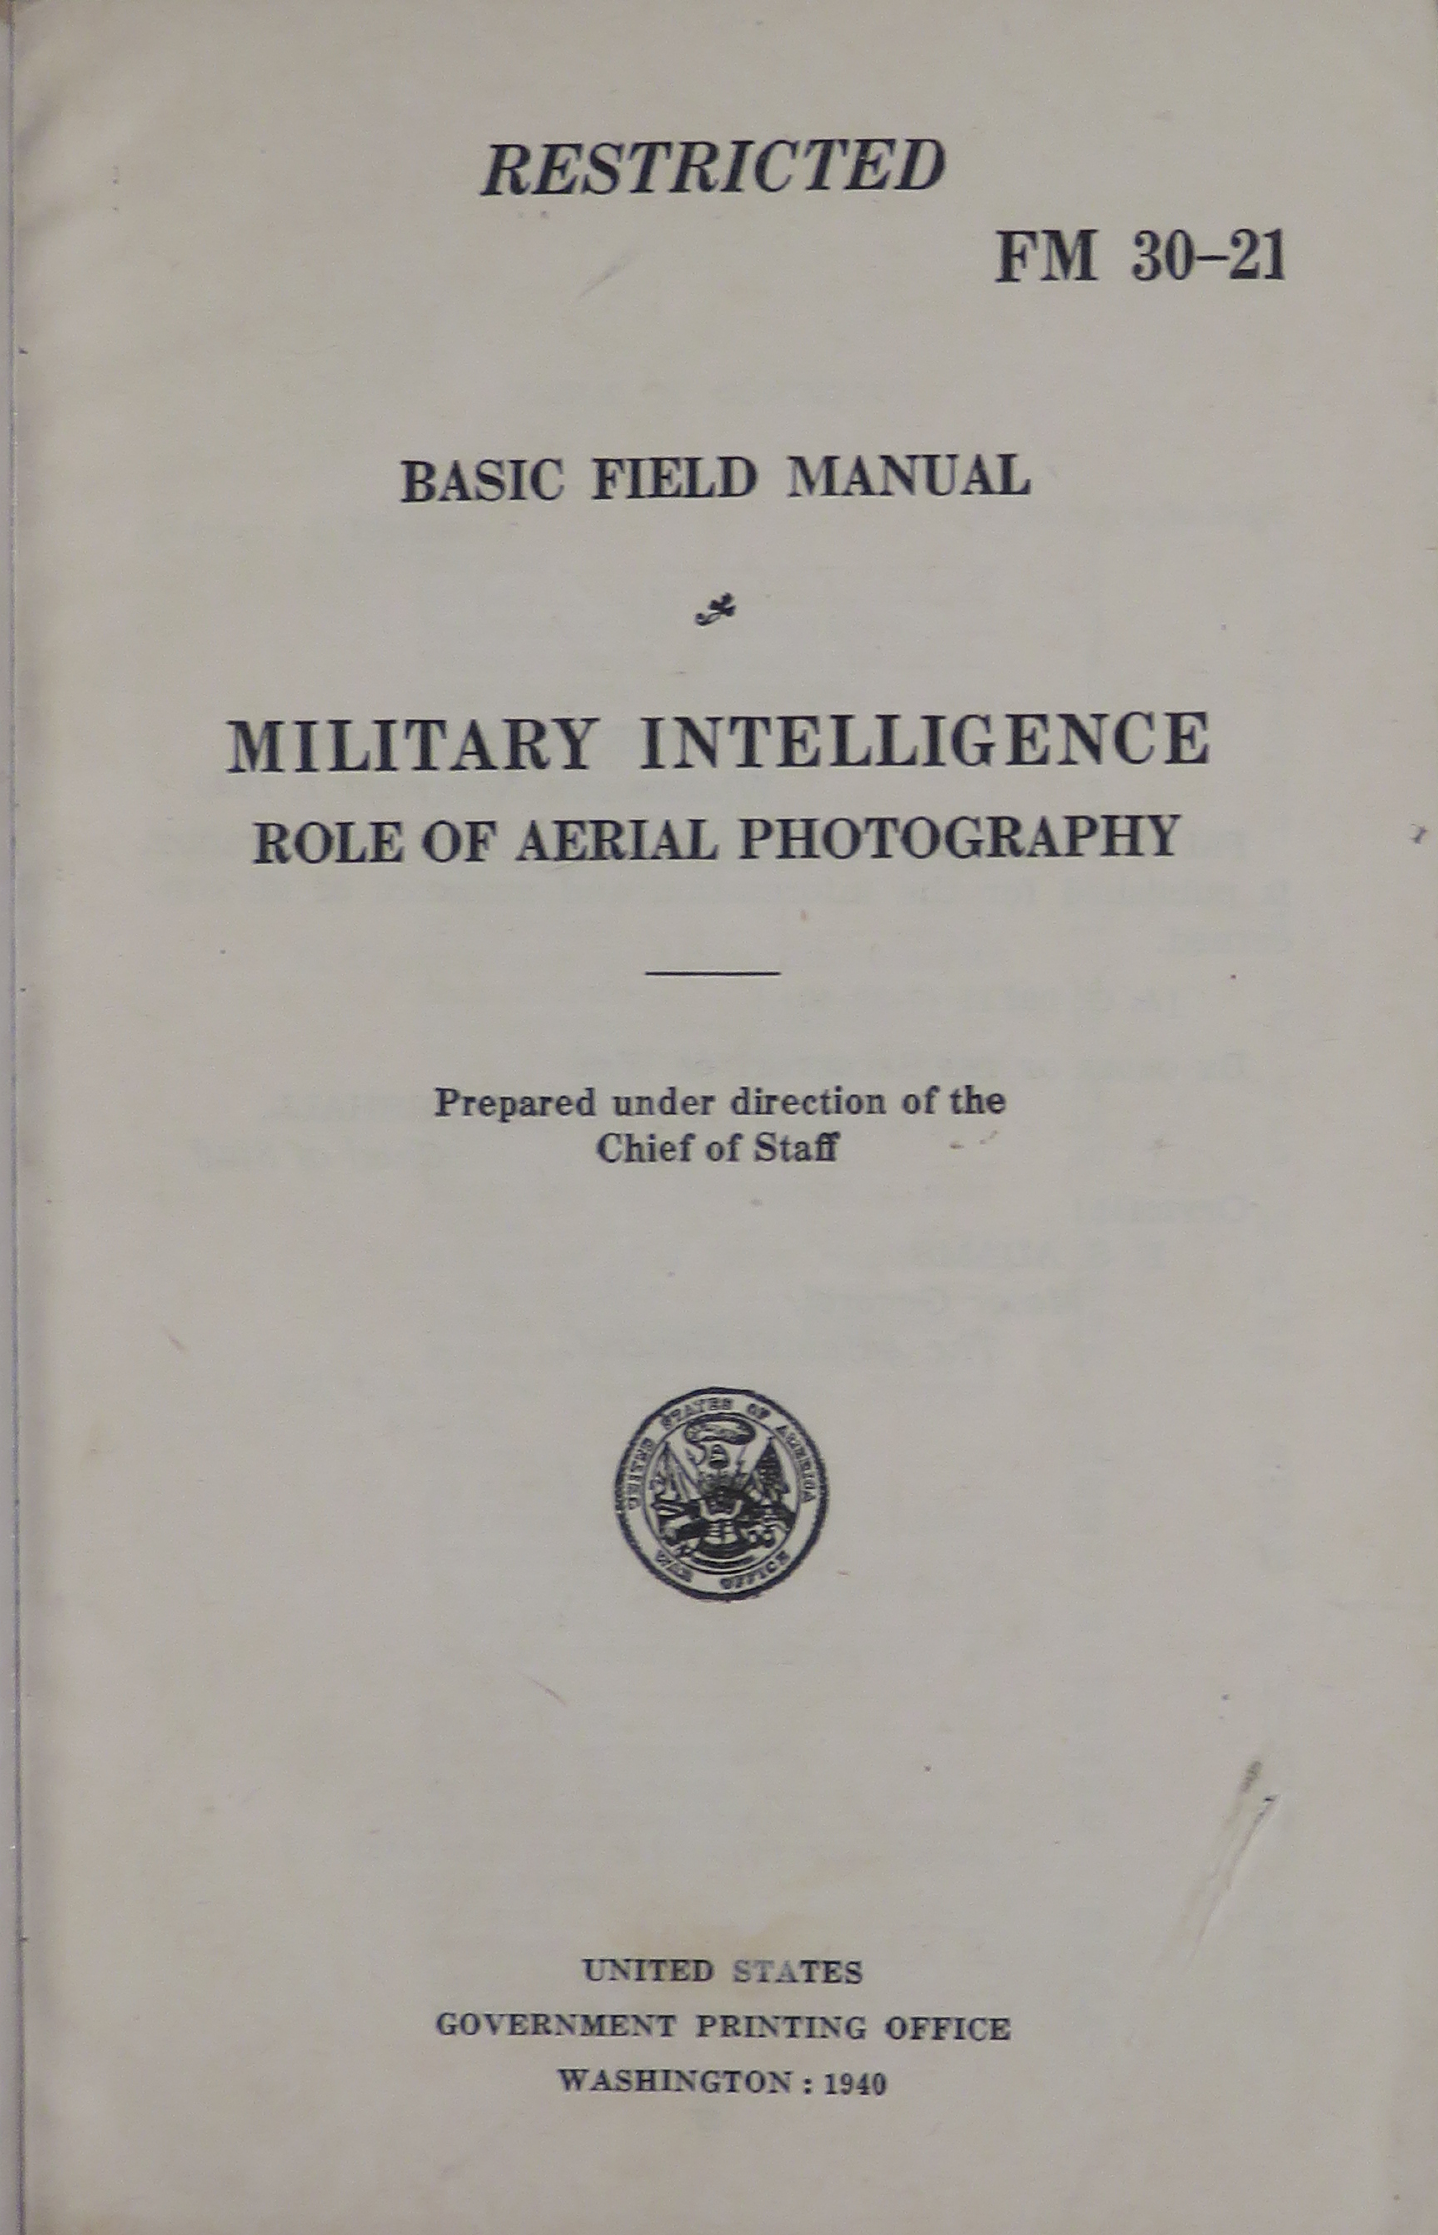 Sample page 5 from AirCorps Library document: Basic Field Manual for Military Intelligence Role of Aerial Photography